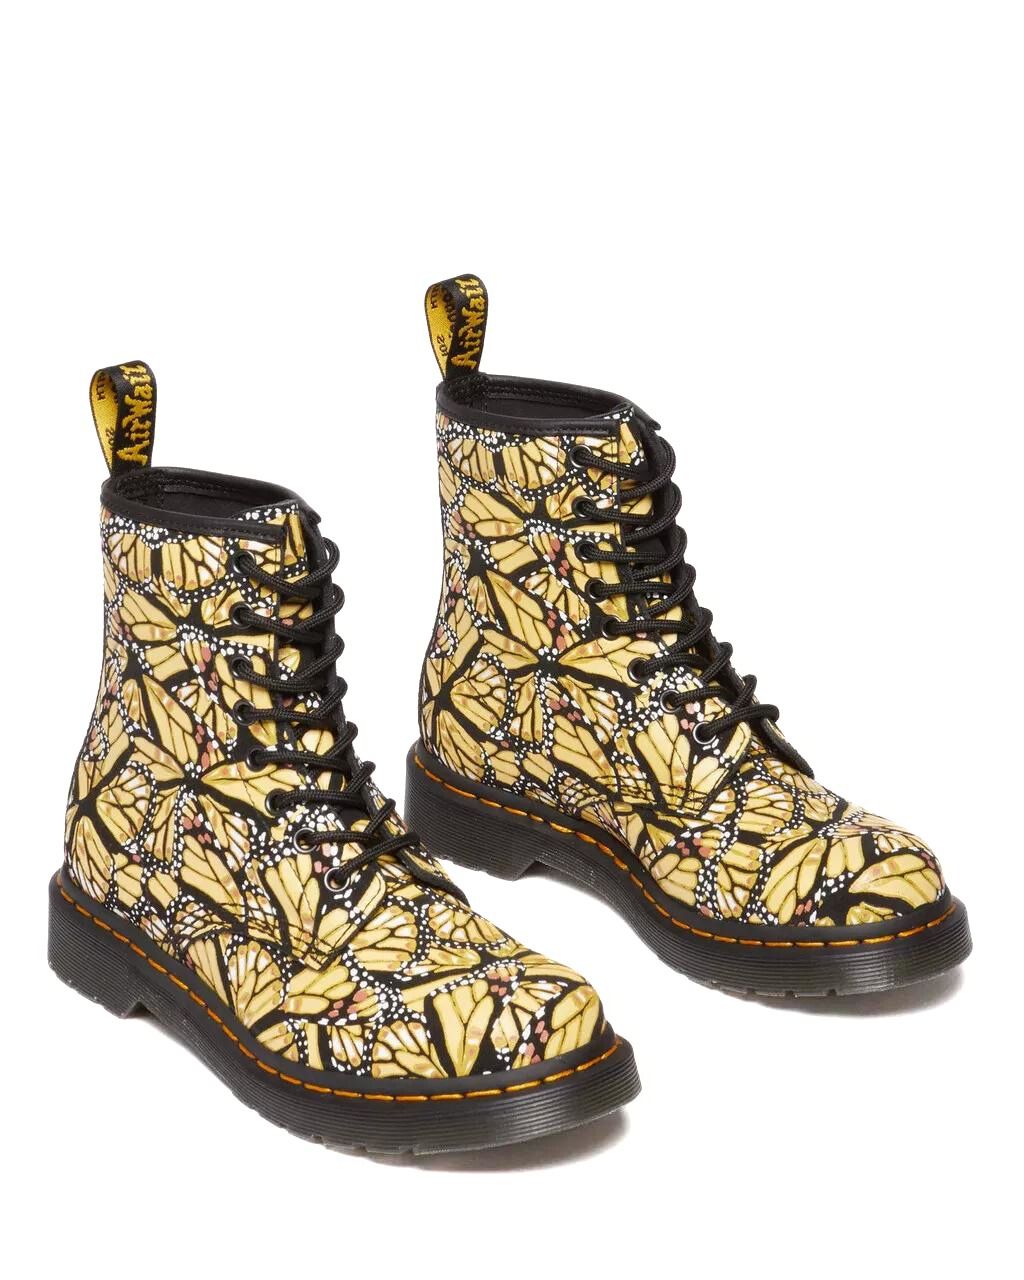 Dr Martens 1460 8 Eye Print Suede Boot Butterfly Yellow